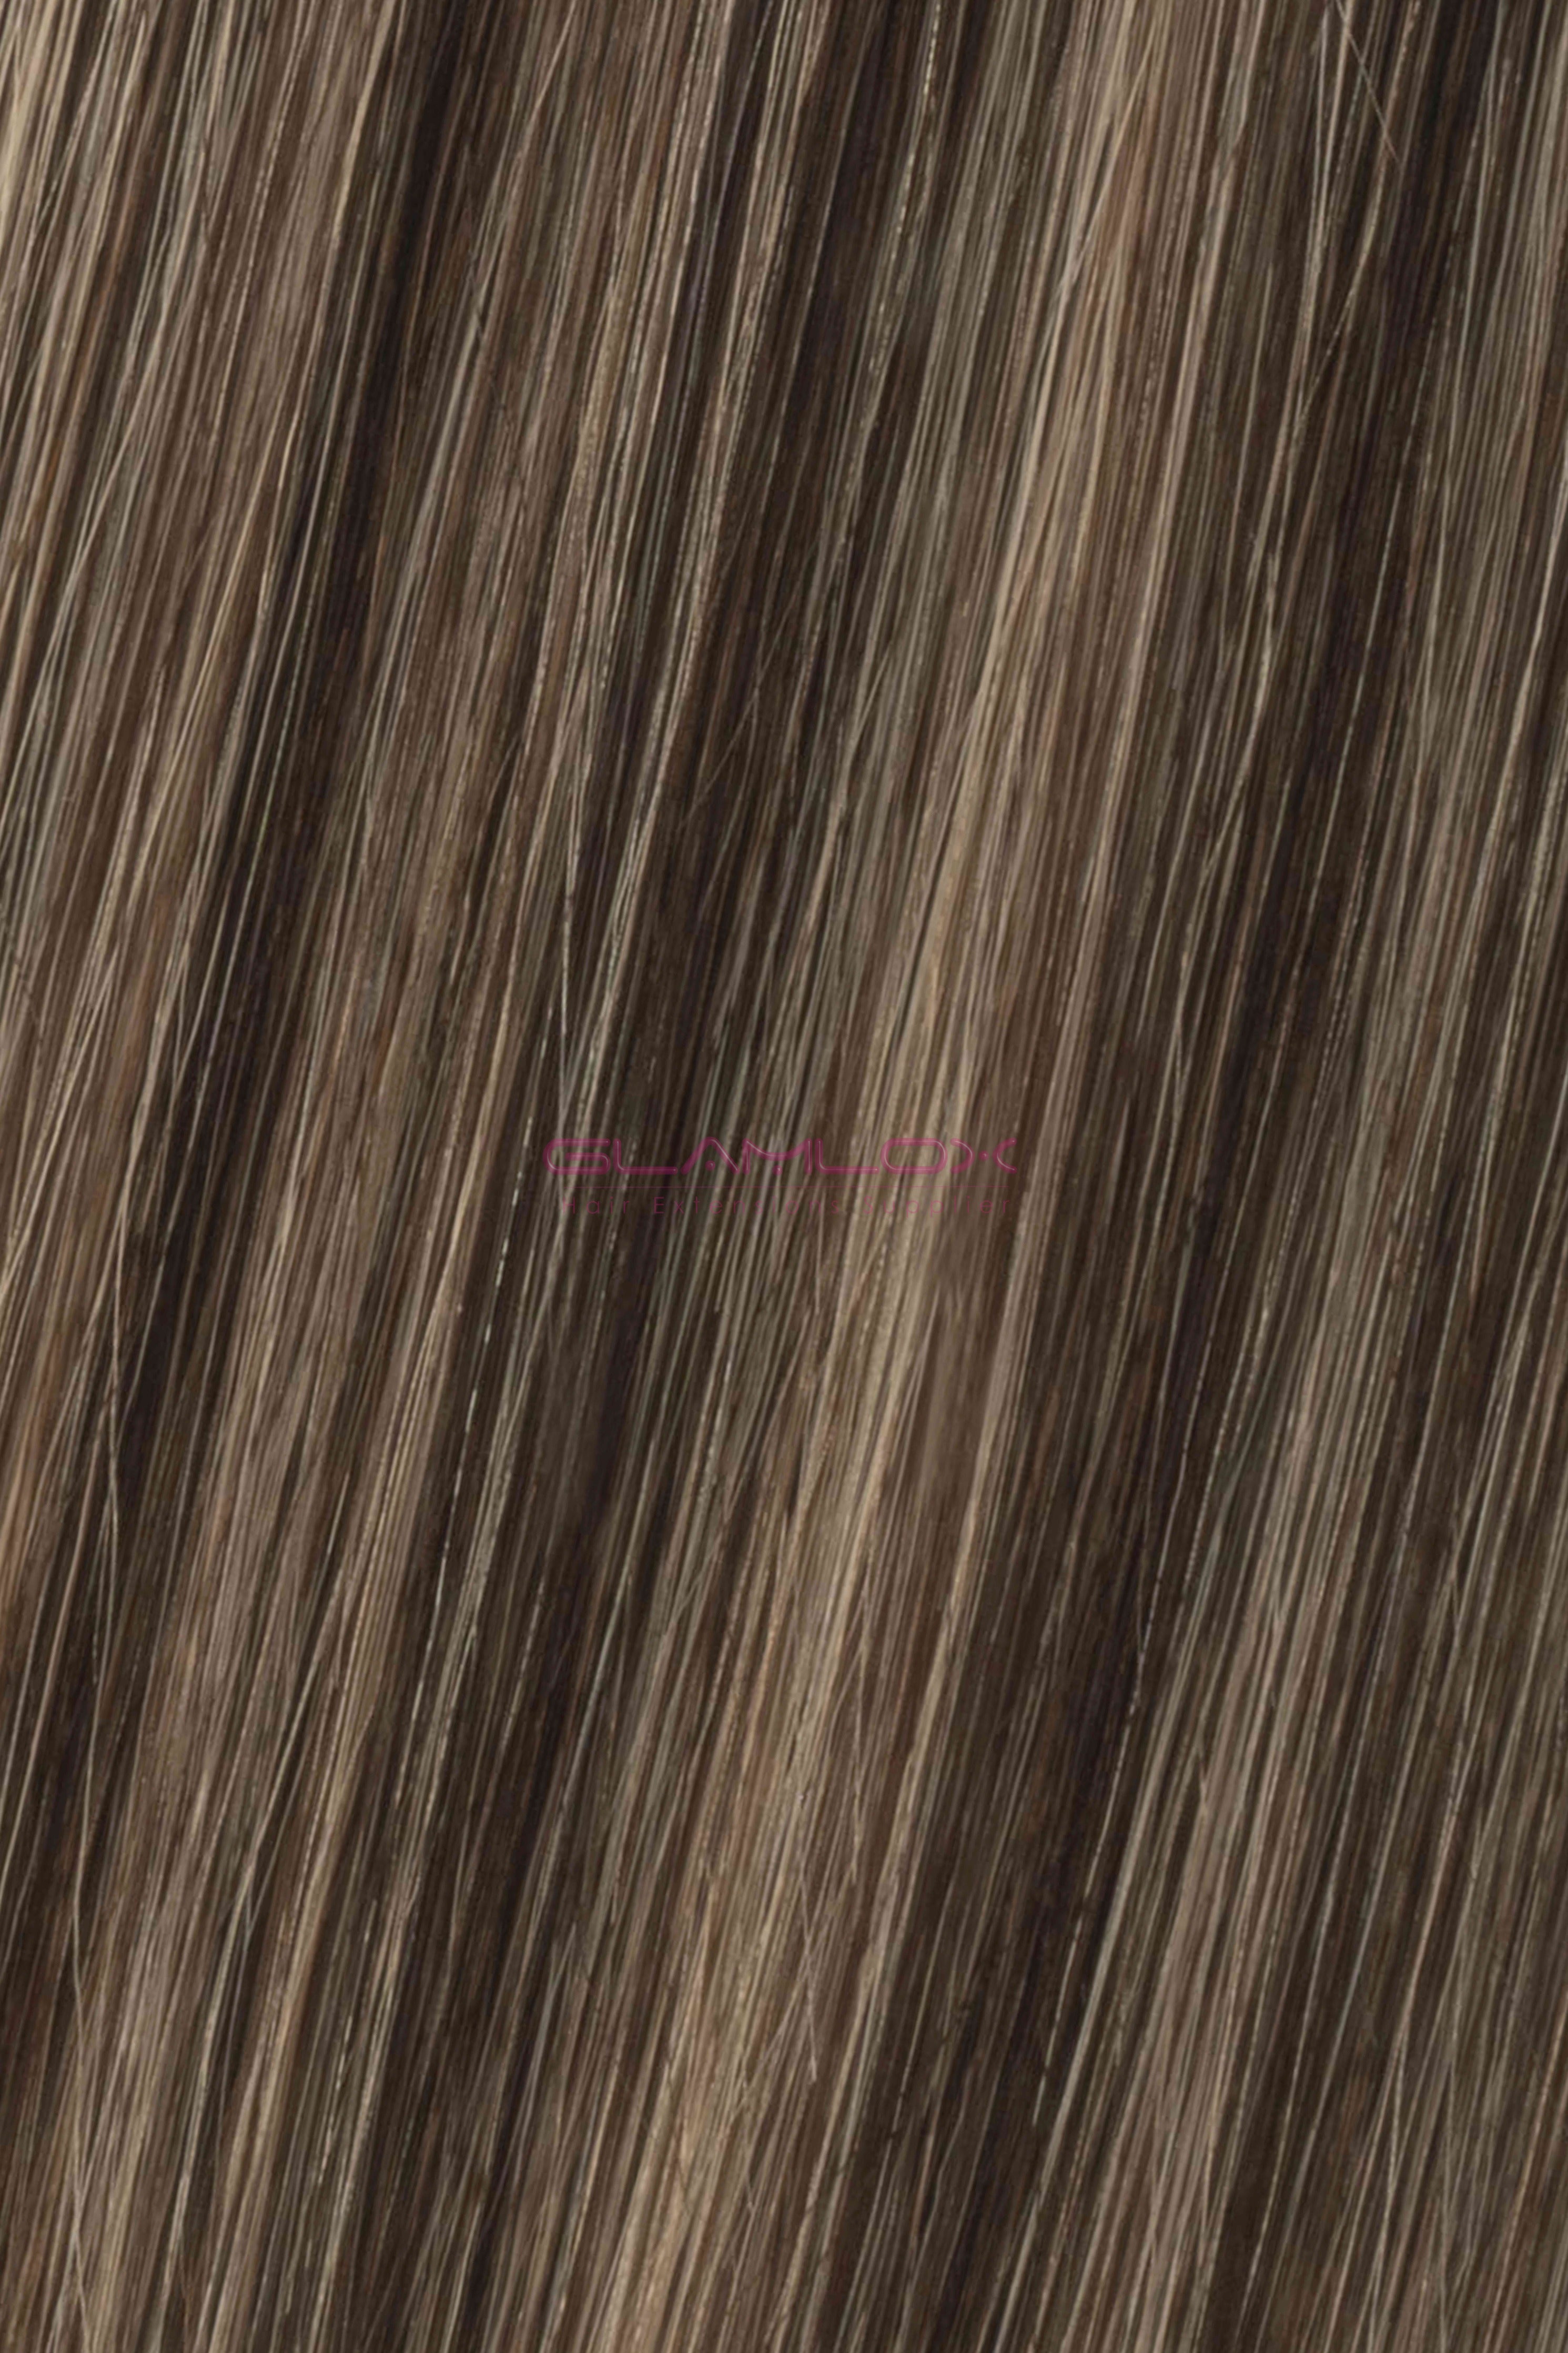 18 - 19" Full Weft Hair Extensions - Russian Mongolian Double Drawn Remy Human Hair